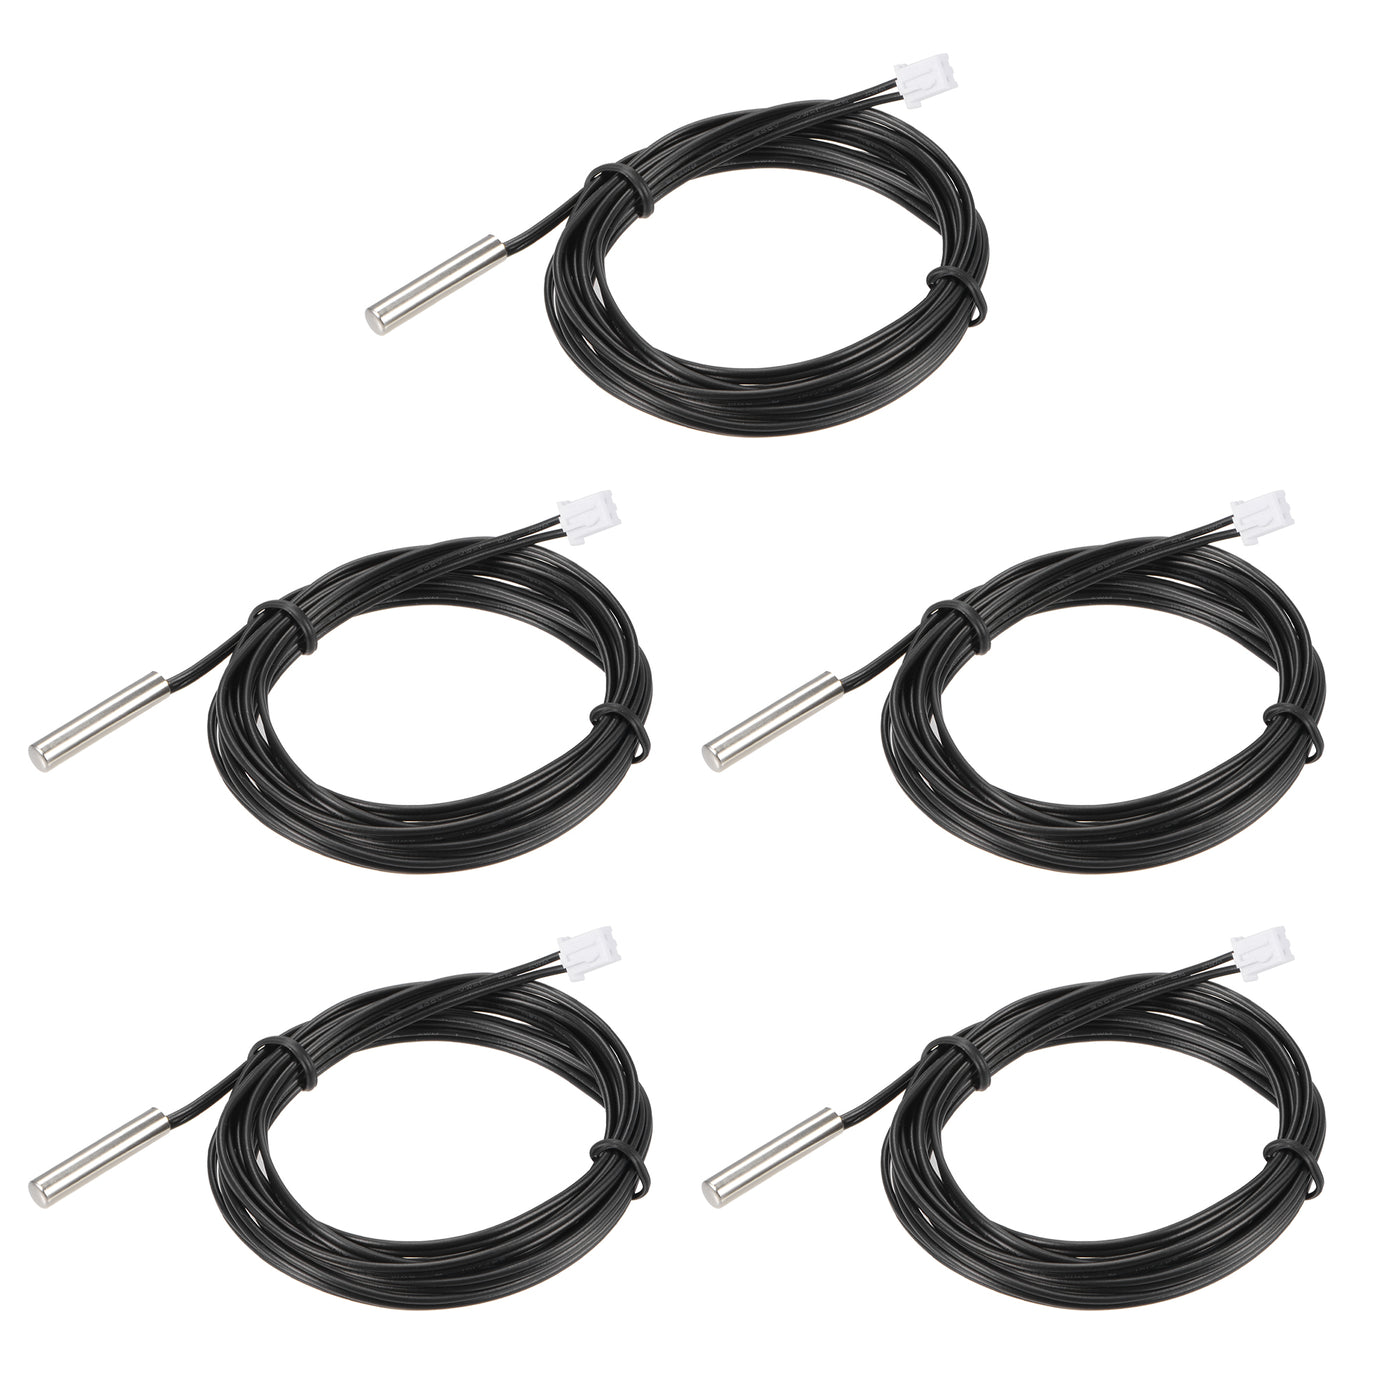 uxcell Uxcell 5pcs 5K Temperature Sensor Probe, Stainless Steel NTC Thermal Sensor Probe 6.6ft Digital Thermometer Extension Cable